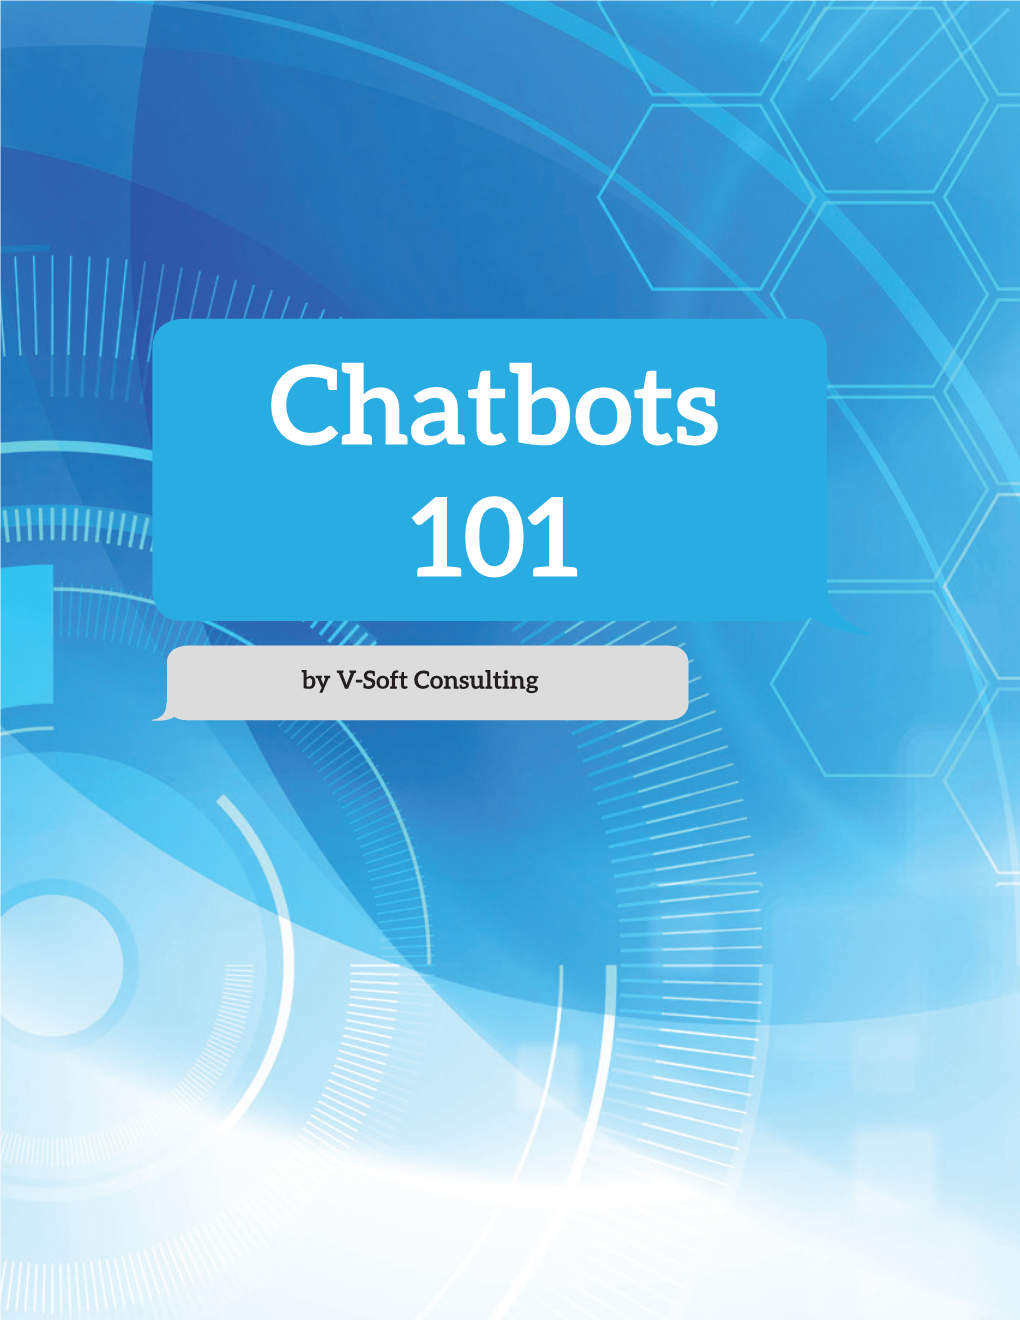 Chatbots 101 | V-Soft Consulting